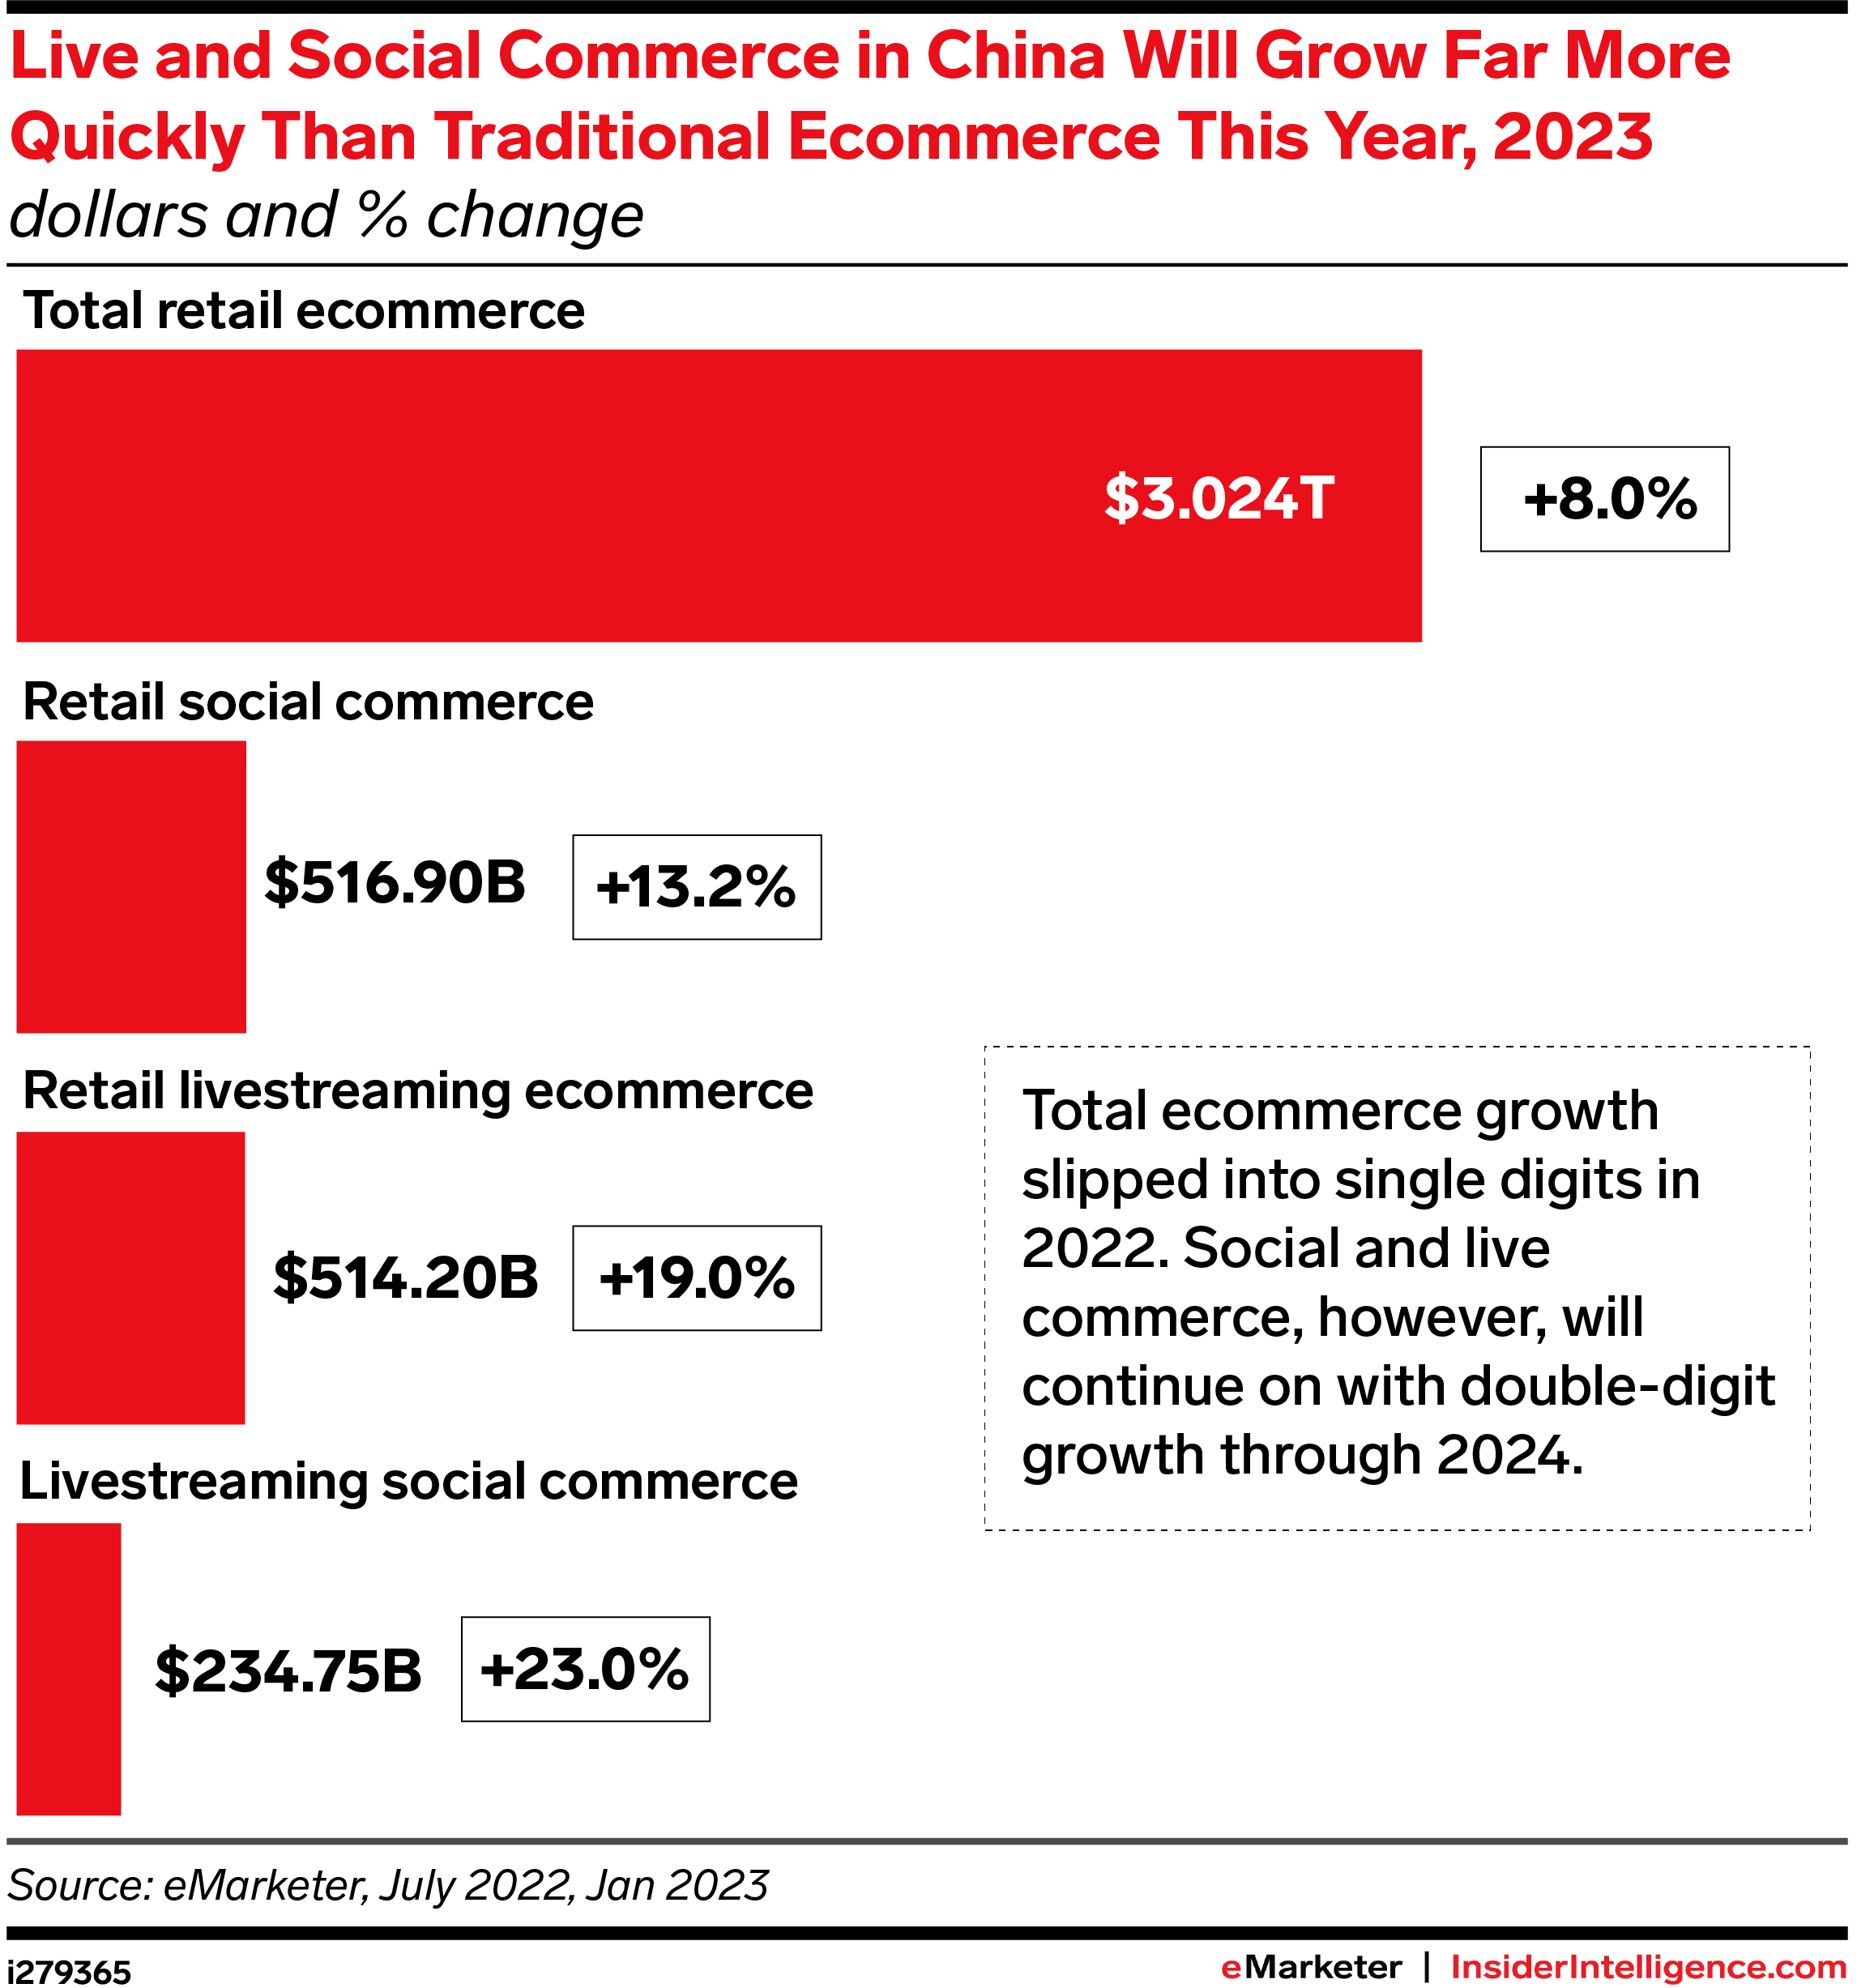 Live and Social Commerce in China Will Grow Far More Quickly Than Traditional Ecommerce This Year, 2023 (dollars and % change)